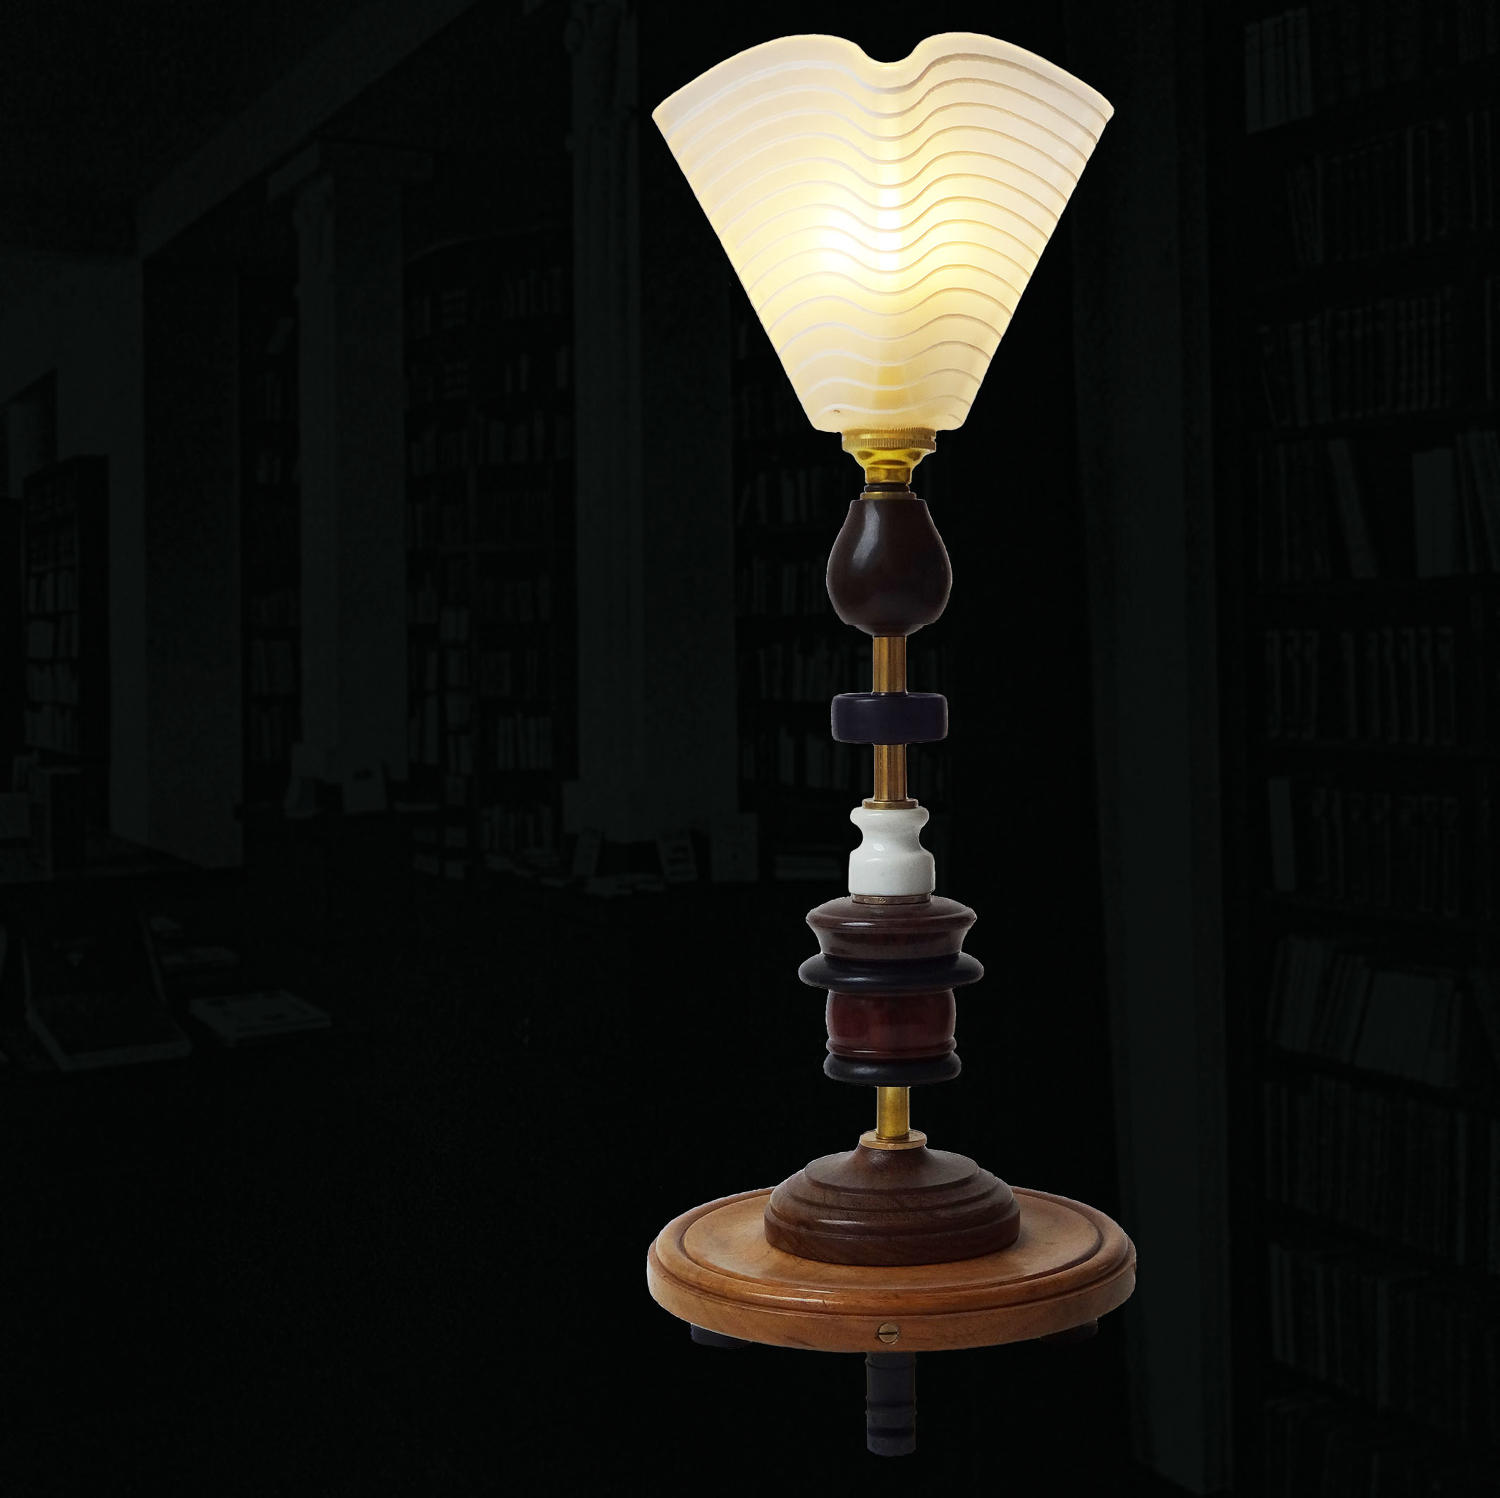 Collectible unique lamp - Variazioni I - by Gilles Bourlet Dartmouth